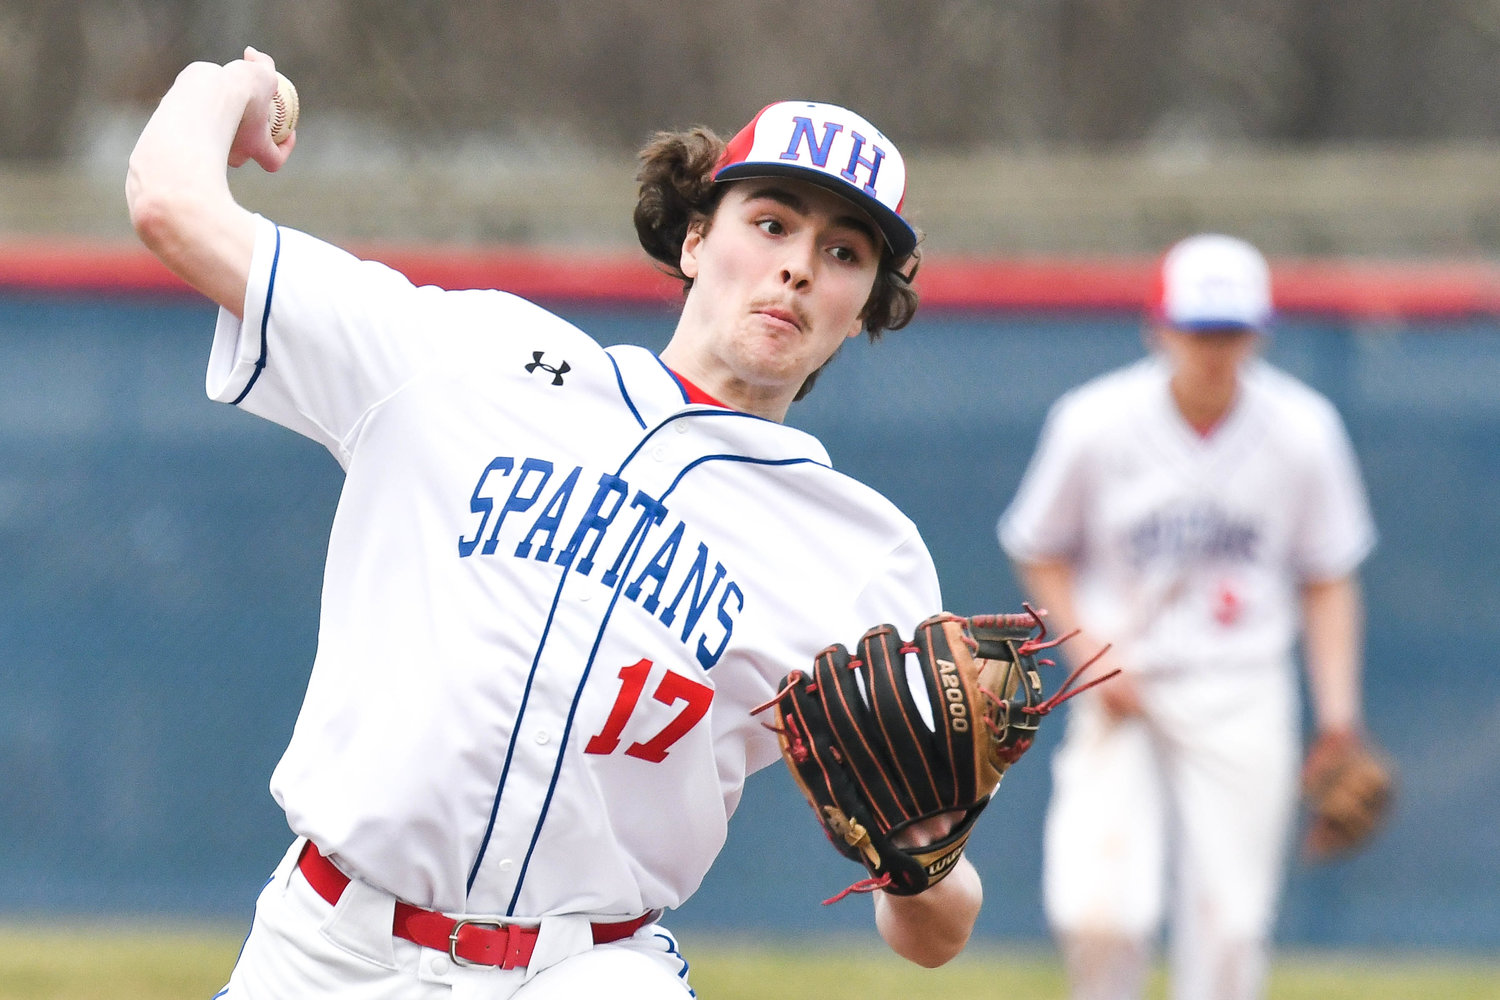 ACE PERFORMANCE — New Hartford pitcher Zach Philipkoski delivers a pitch during the game against Holland Patent on Monday. The junior got the win on the mound as the Spartans won 10-1. He allowed two hits and one run while striking out four in five innings.